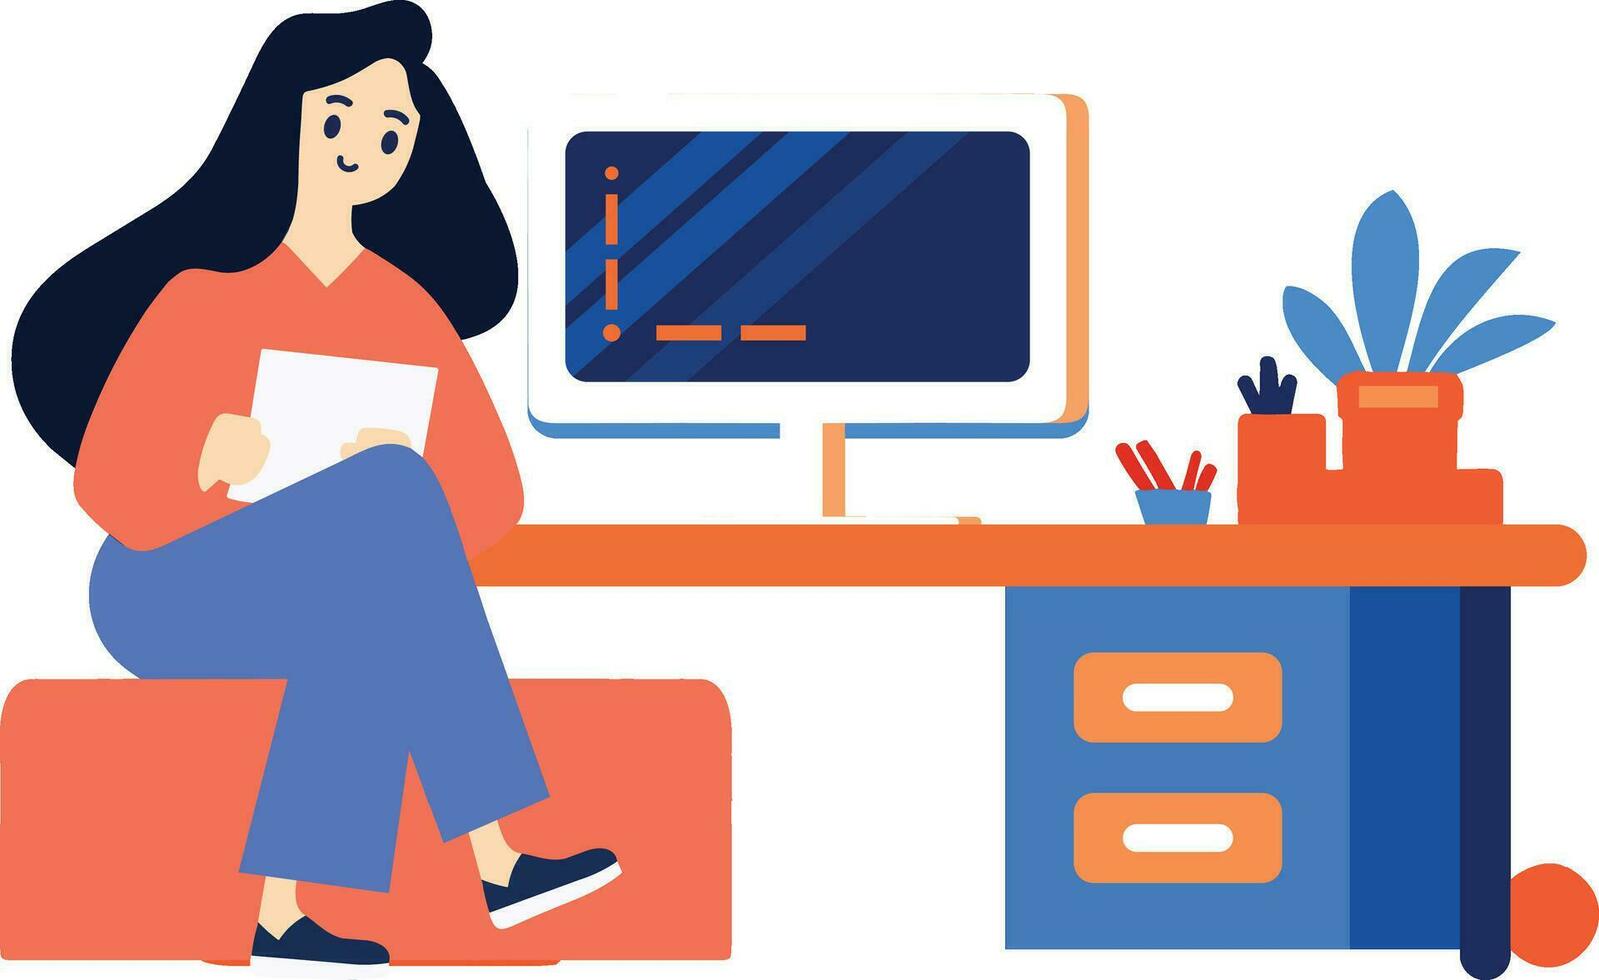 Hand Drawn A female character is sitting and reading a book in her office in flat style vector